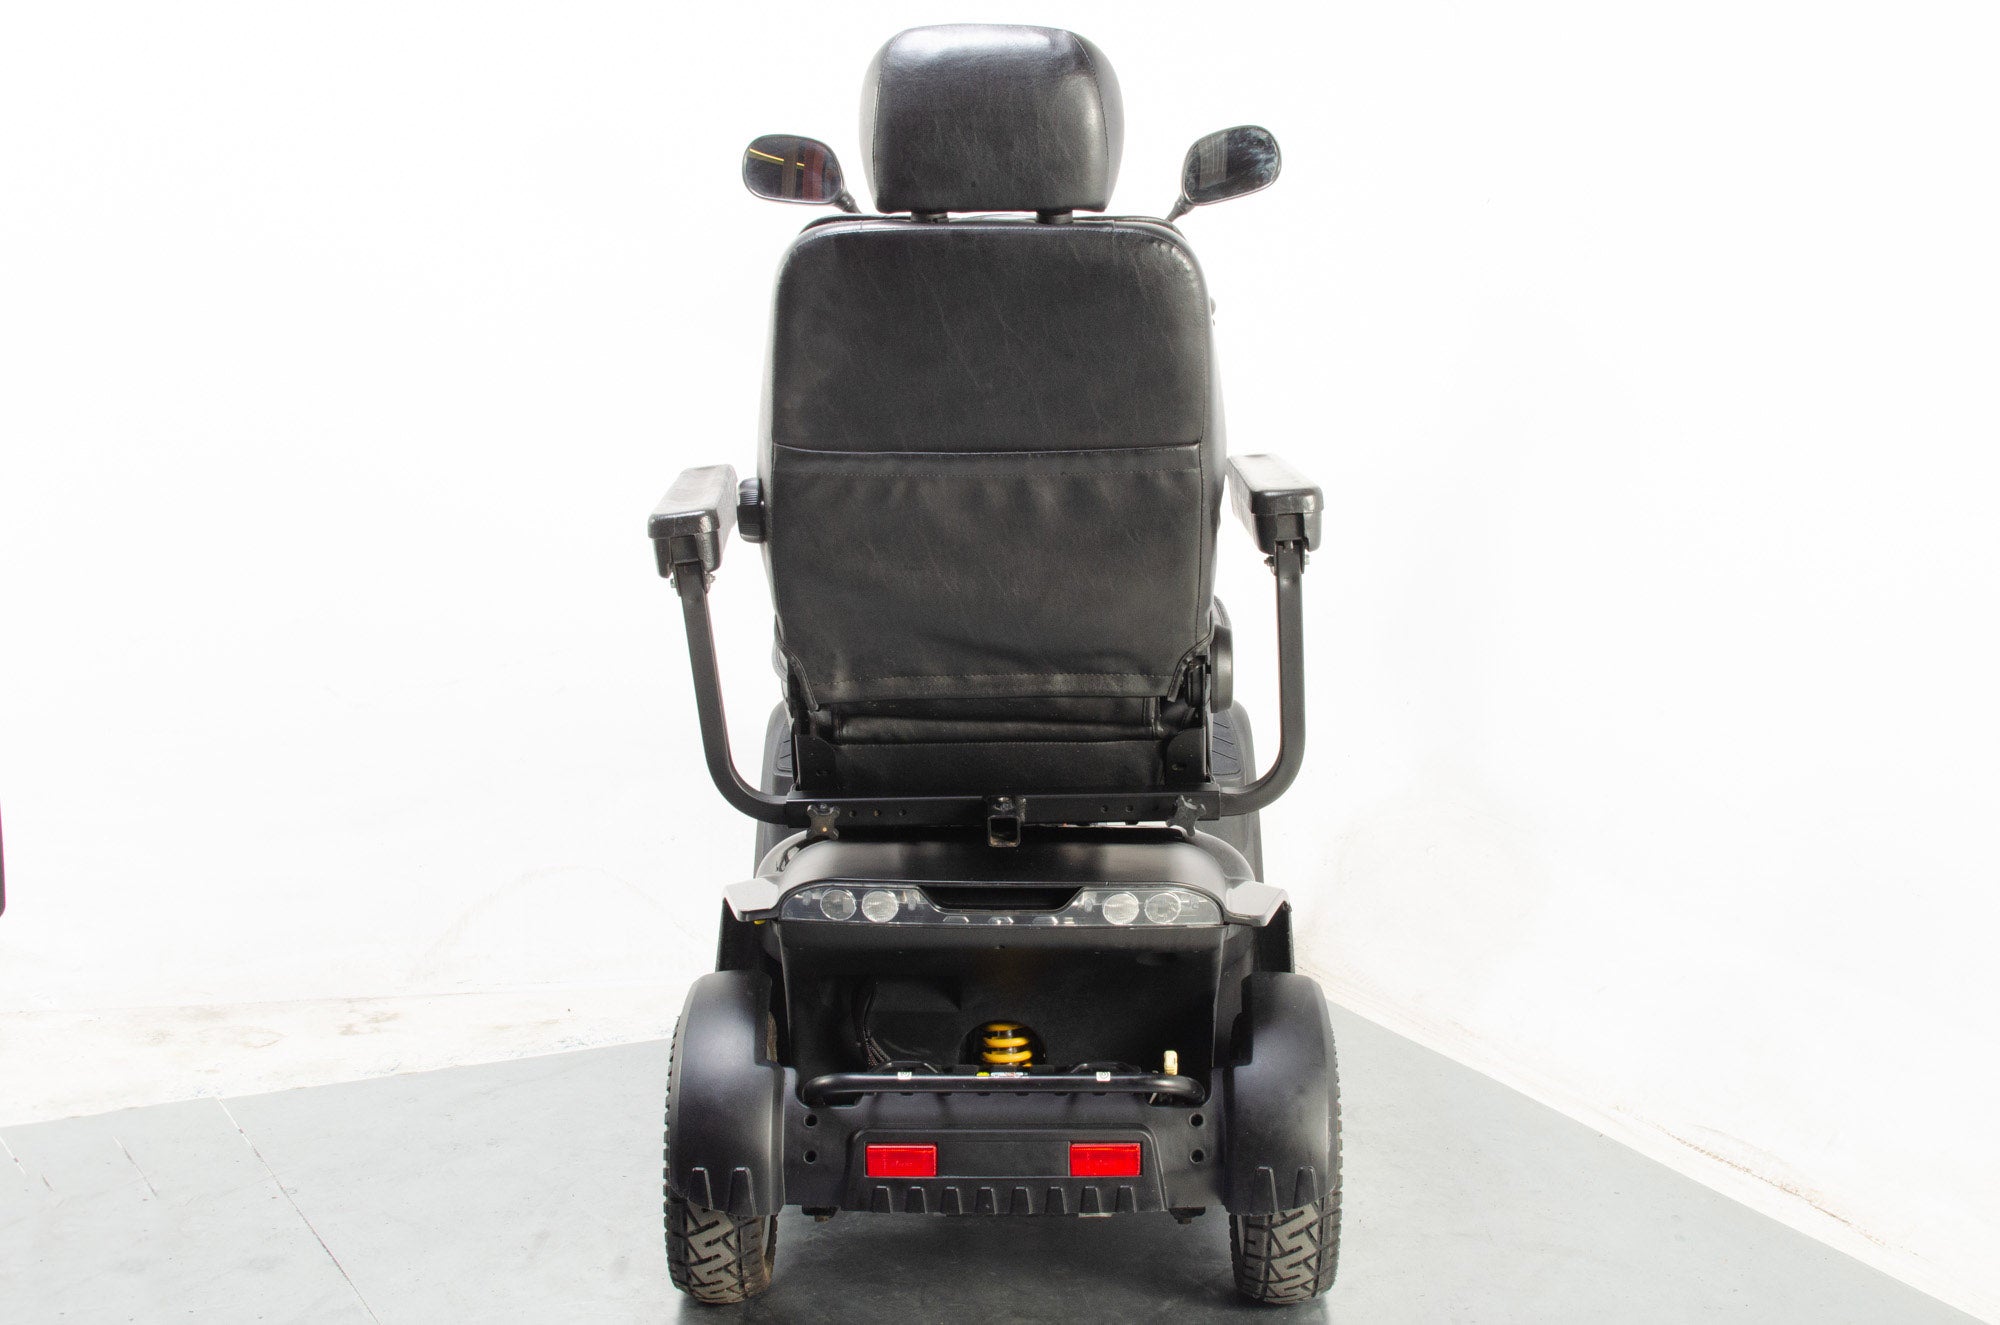 Pride Colt Executive Electric Mobility Scooter Used 8mph All-Terrain Off-Road Pneumatic Suspension